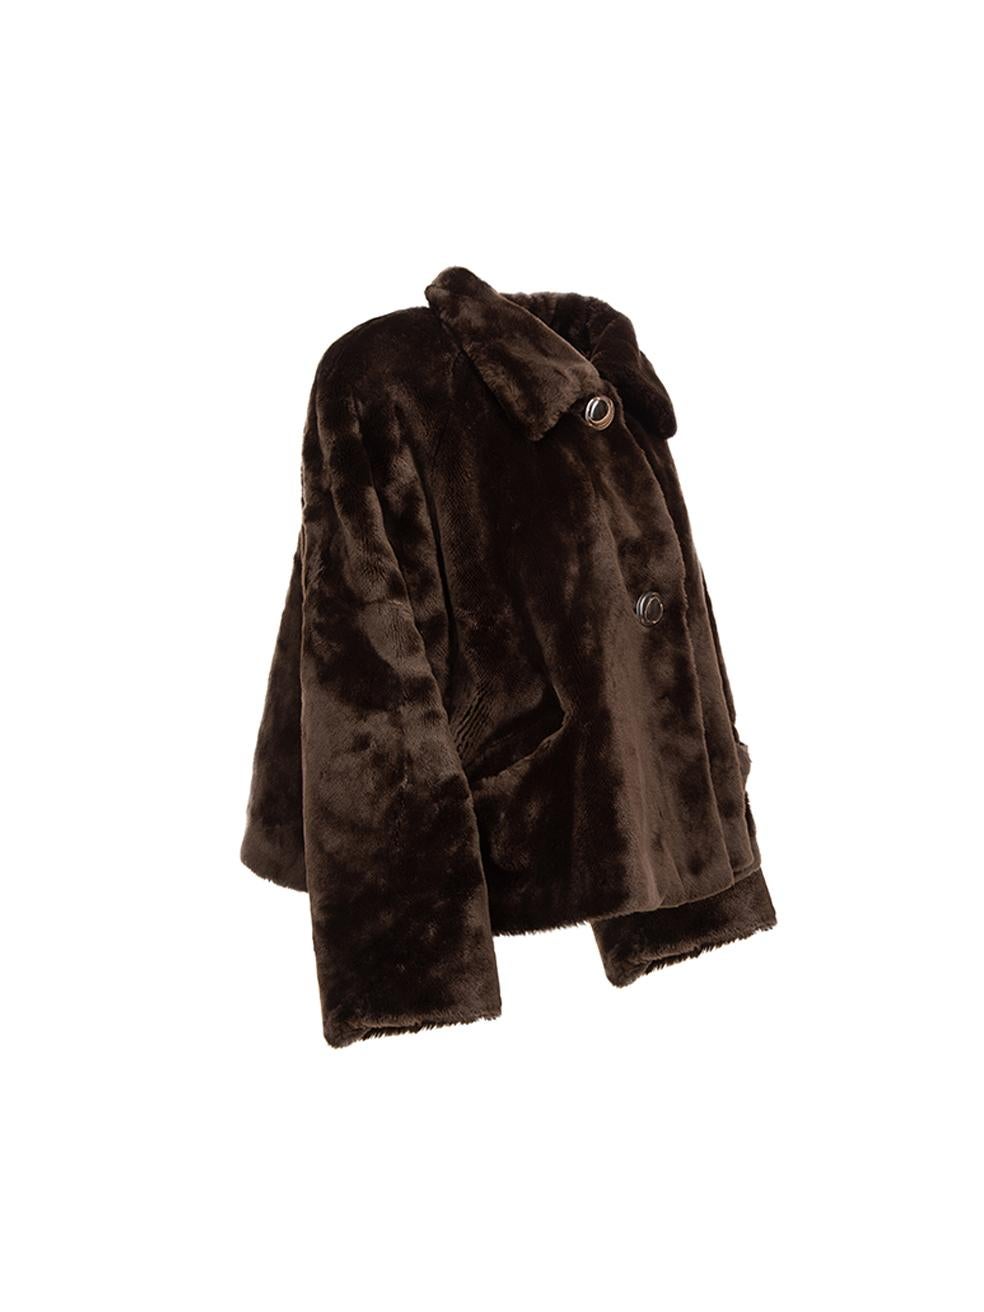 CONDITION is Very good. Hardly any visible wear to brown is evident on this used Pierre Cardin designer resale item.



Details


Brown

Faux fur

Cropped oversized jacket

Front oversized button closure

Front side pockets





Composition

NO